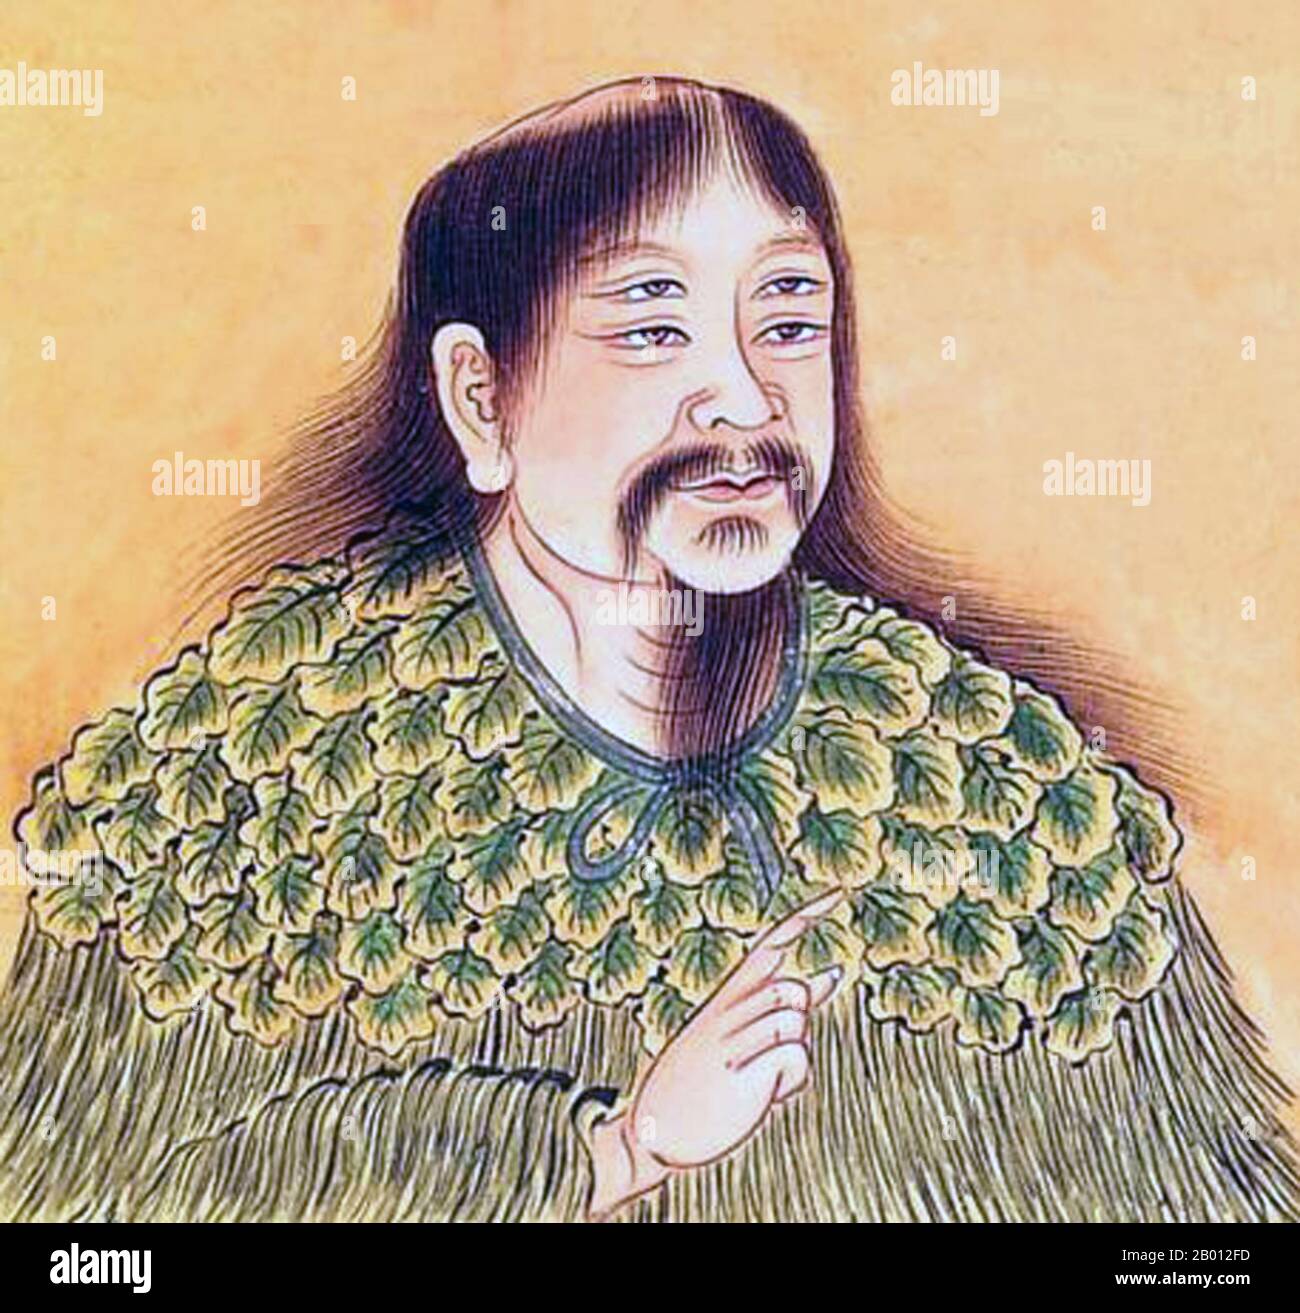 China: Cangjie (Ts'ang-chieh, c. 2650 BC), four-eyed official historian of the Yellow Emperor and the inventor of Chinese characters. Painting, 1685.  Cangjie (Ts'ang-chieh) is a very important figure in ancient China (c. 2650 BC), held to be the official historian of the Yellow Emperor and the inventor of Chinese characters. Legend has it that he had four eyes and four pupils, and that when he invented the characters, the deities and ghosts cried and the sky rained millet. He is considered a legendary figure rather than a historical figure. Stock Photo